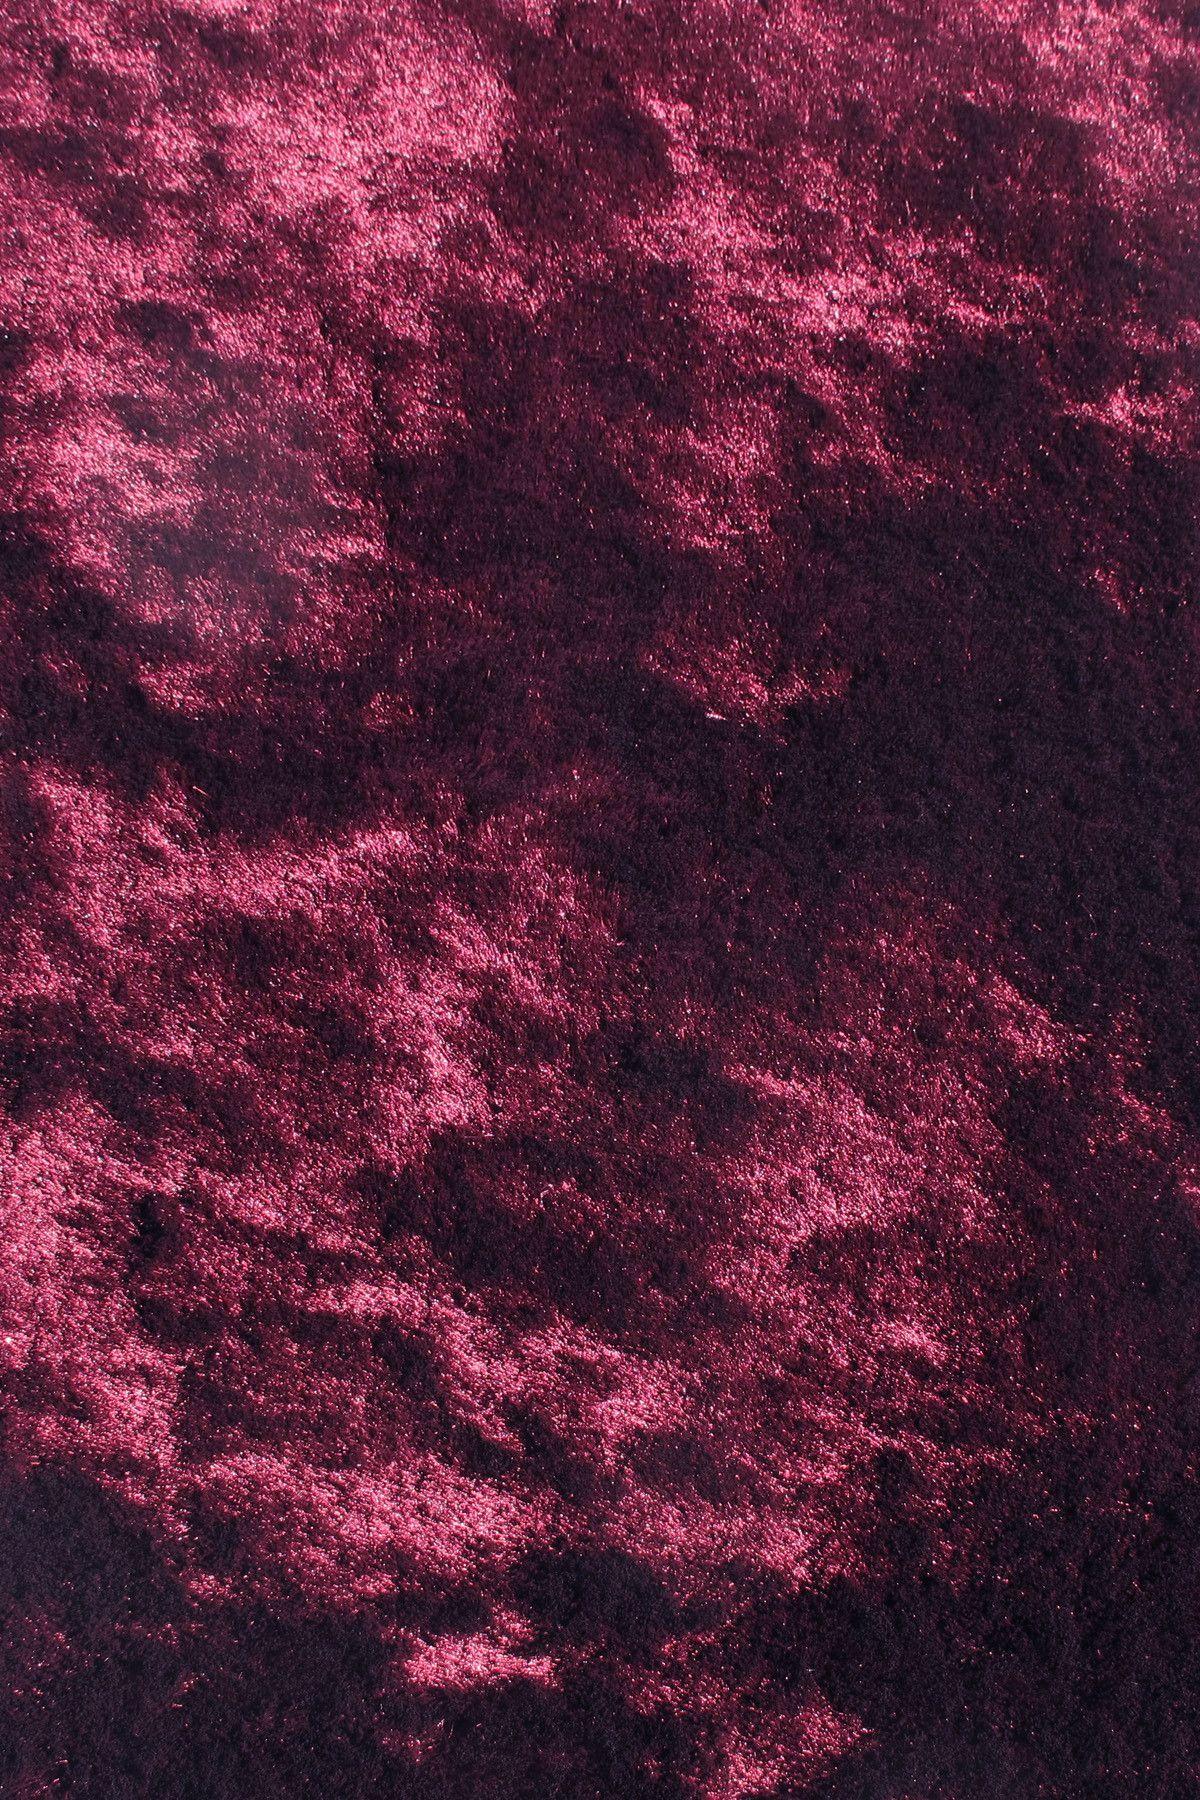 Burgundy Iphone Wallpapers Top Free Burgundy Iphone Backgrounds Wallpaperaccess 6465